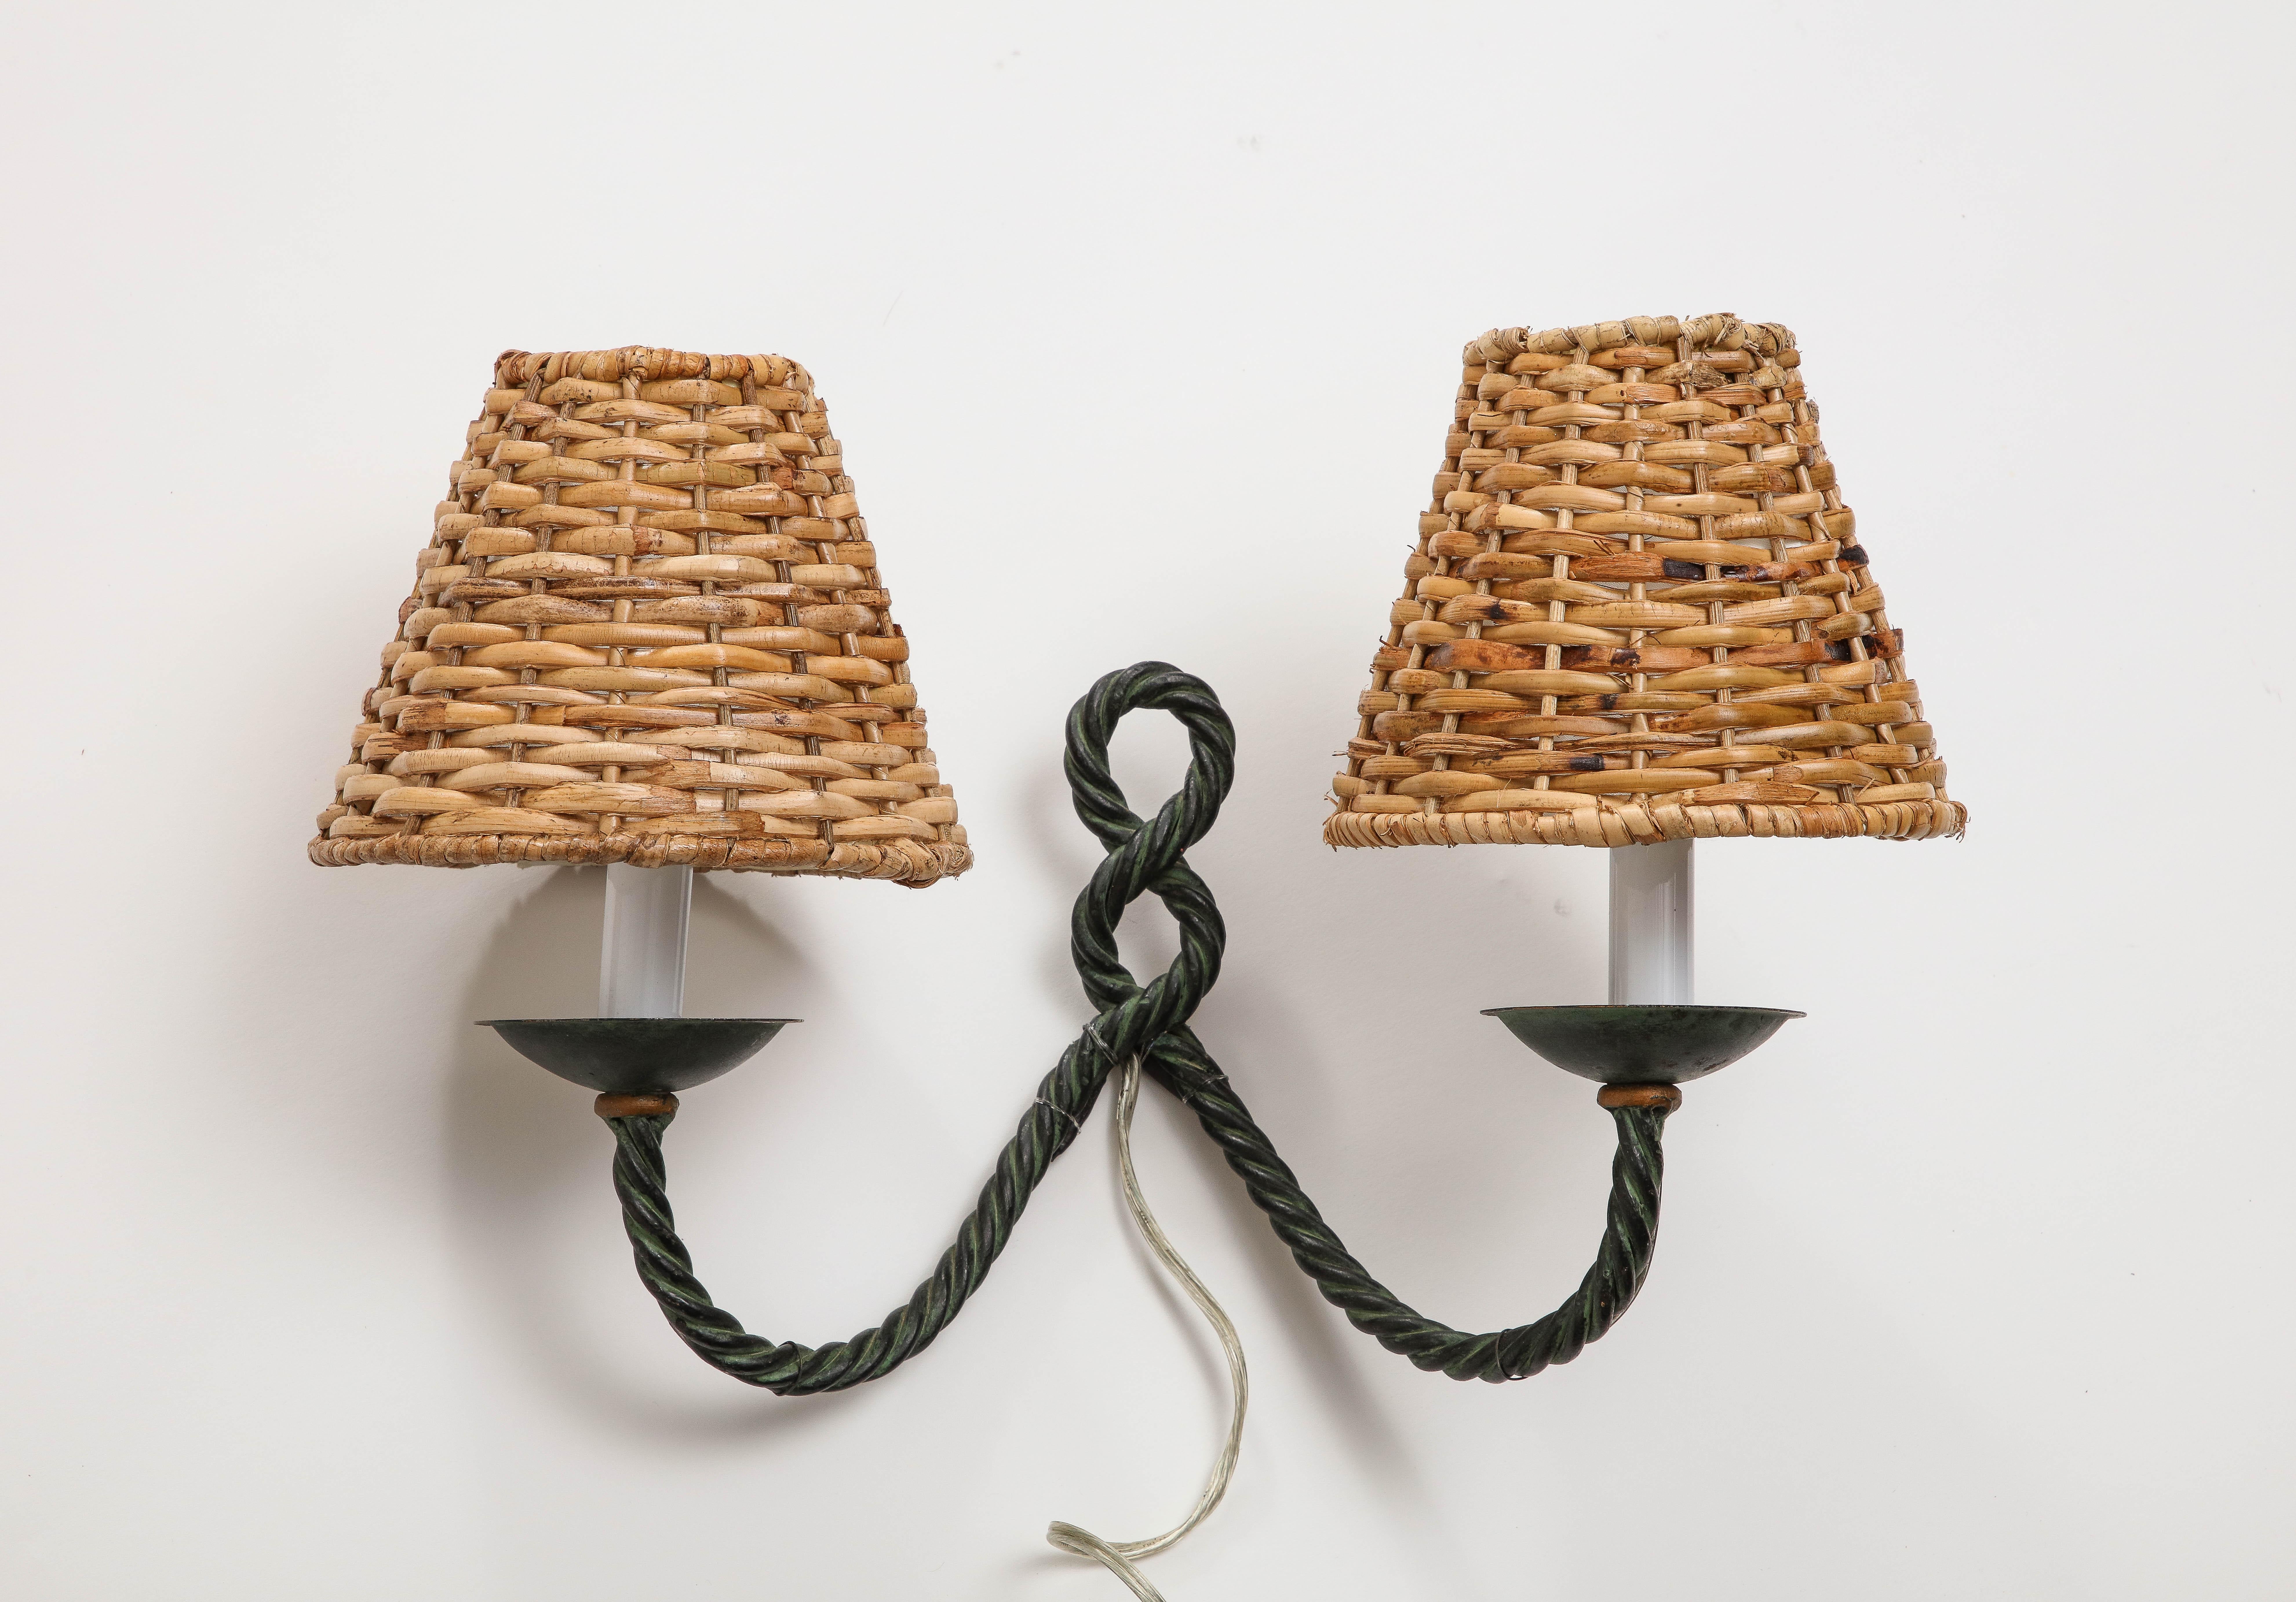 Pair of midcentury 1950s French wall sconces, with two bronze rope arms and antique patina. Two candelabra sockets per sconce; wicker lampshades included. Newly rewired for USA. 

Provenance: Atelier VIME

Measures: 8.5